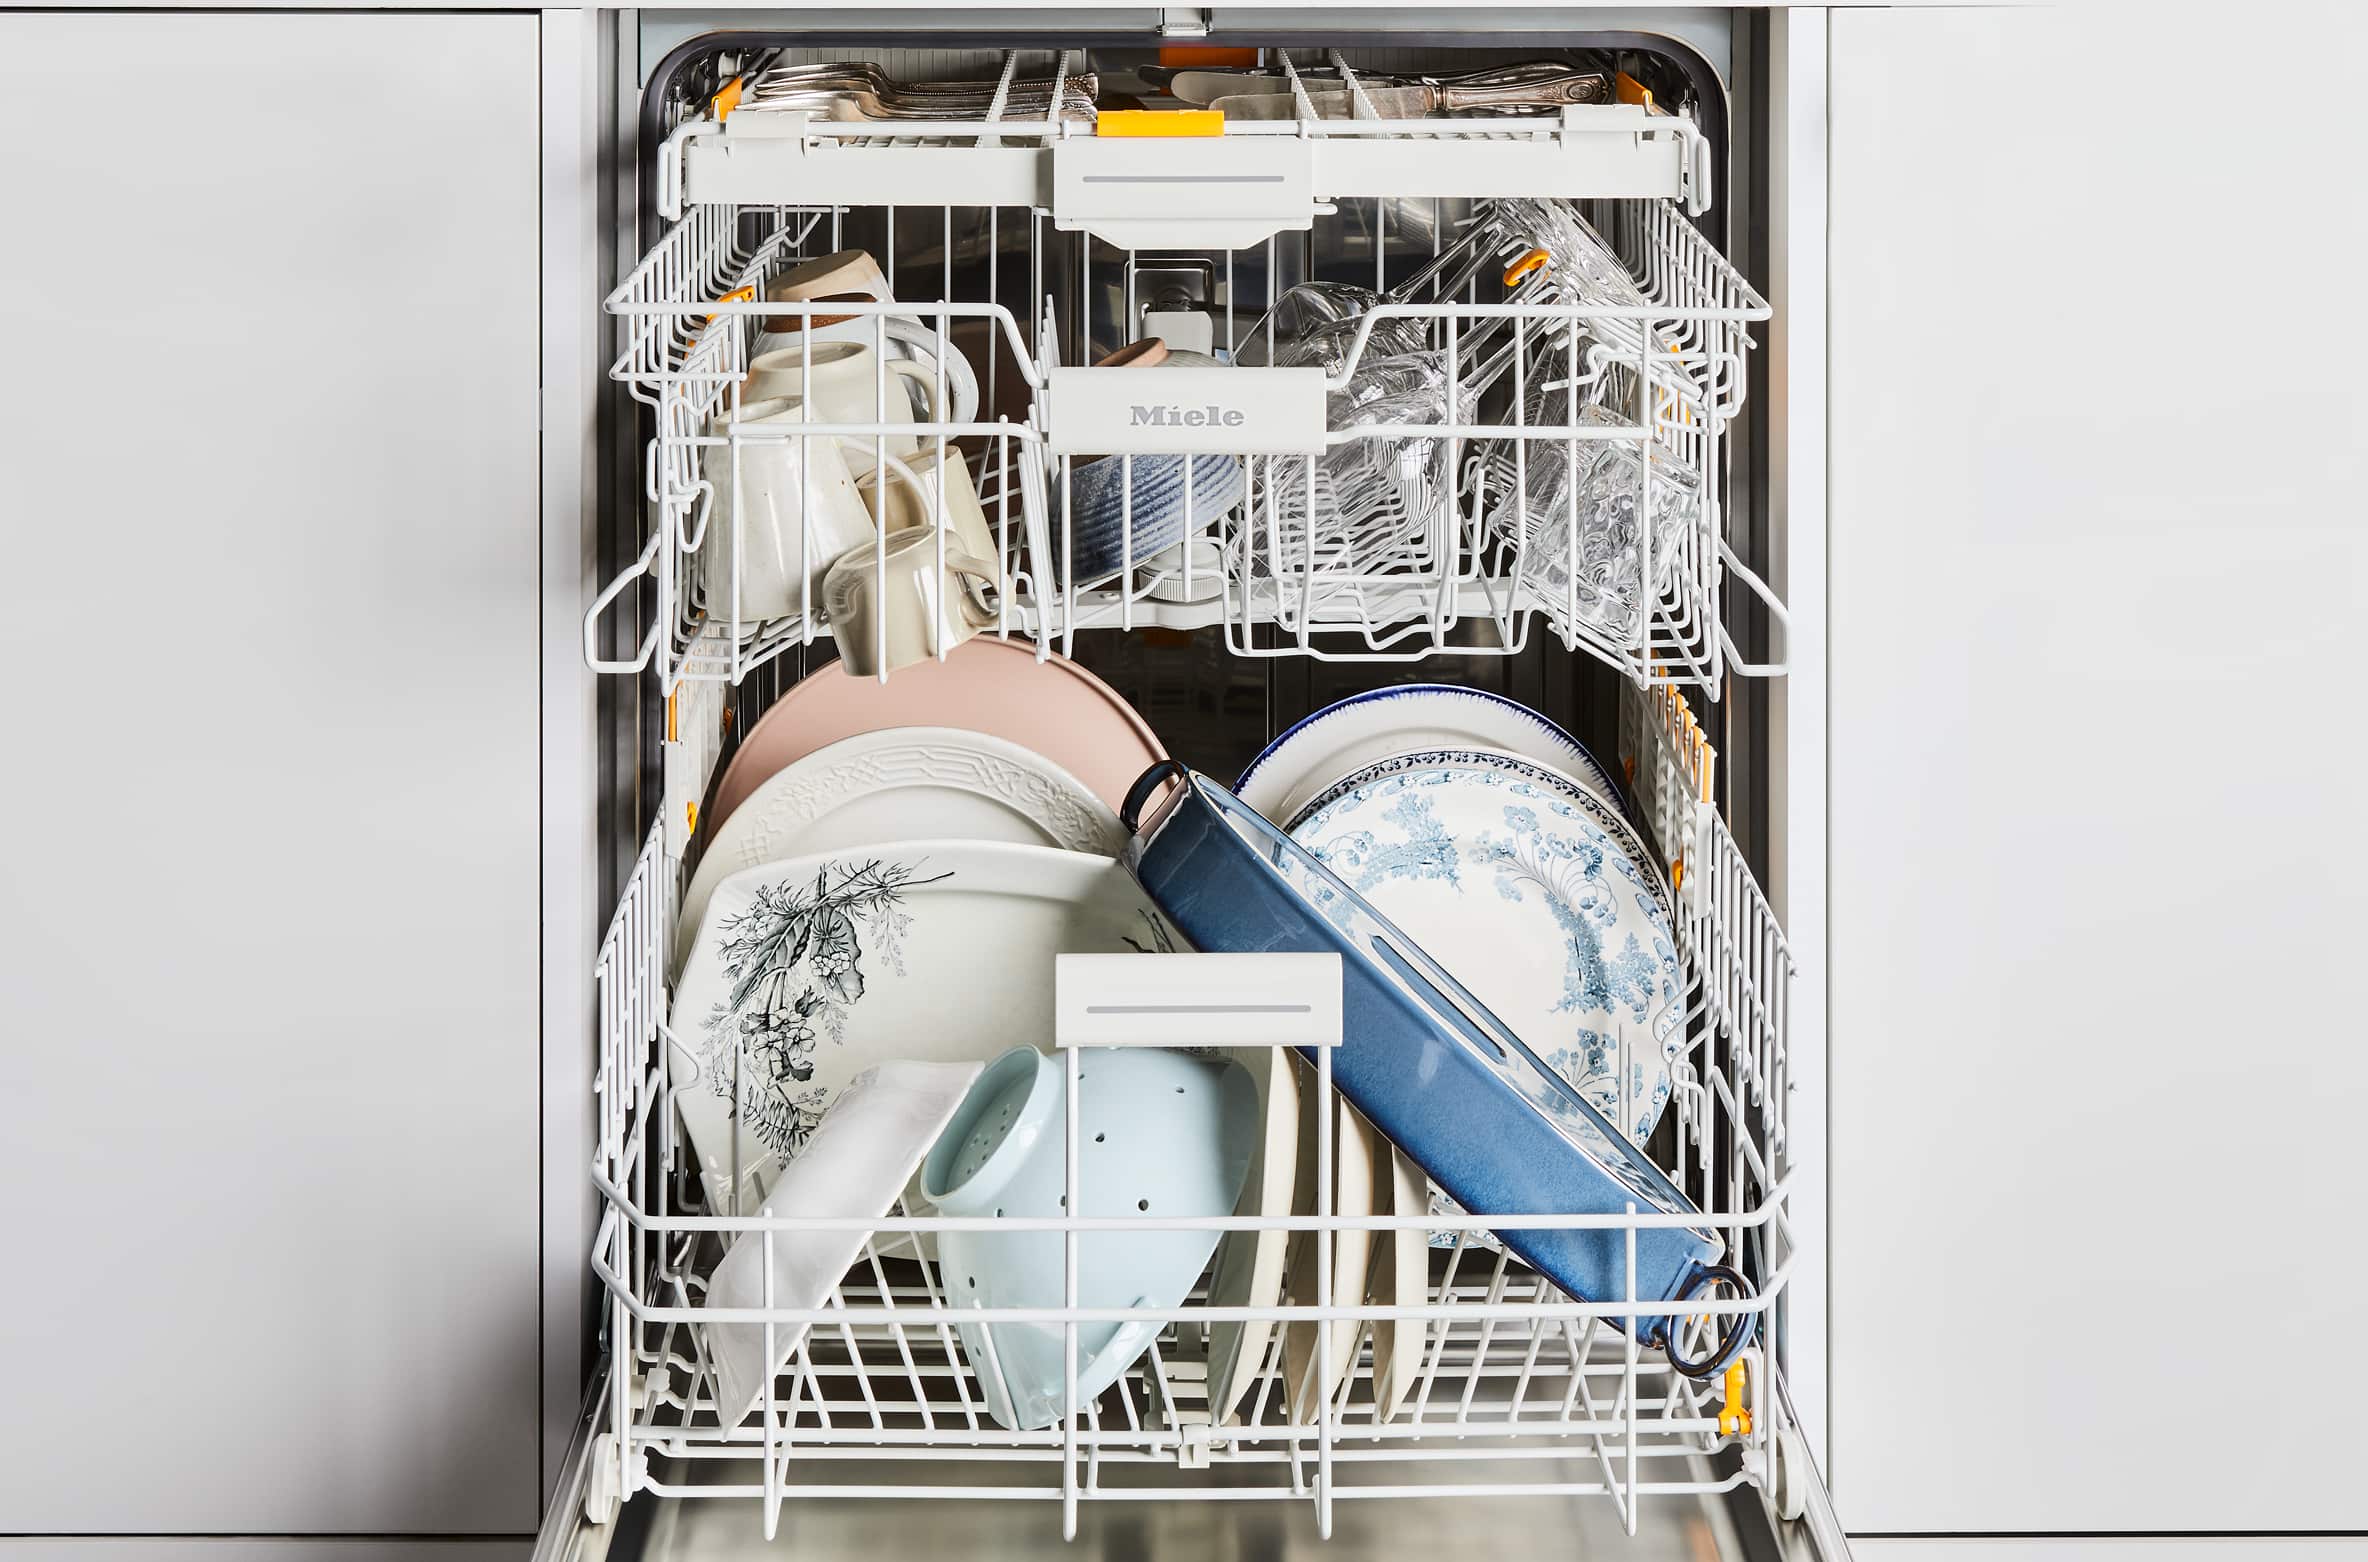 miele dishwasher not cleaning